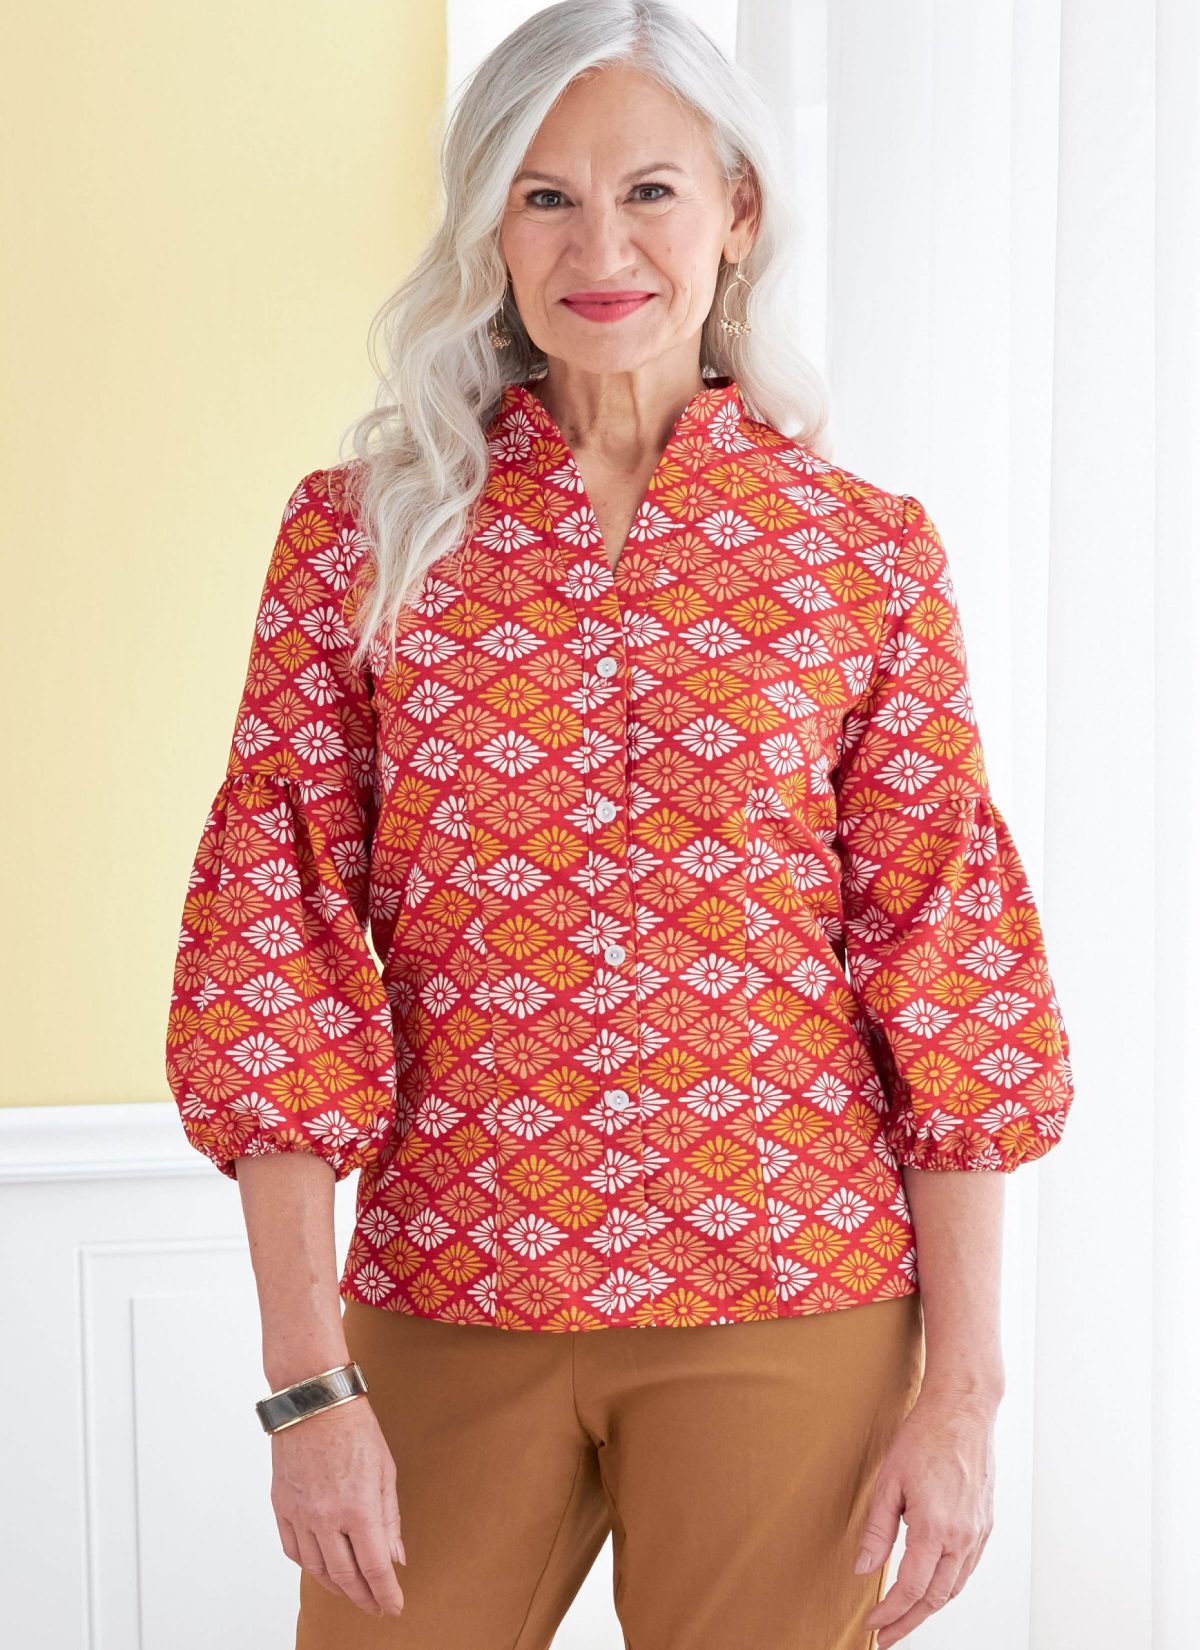 Butterick Sewing Pattern B6816 Misses' Top